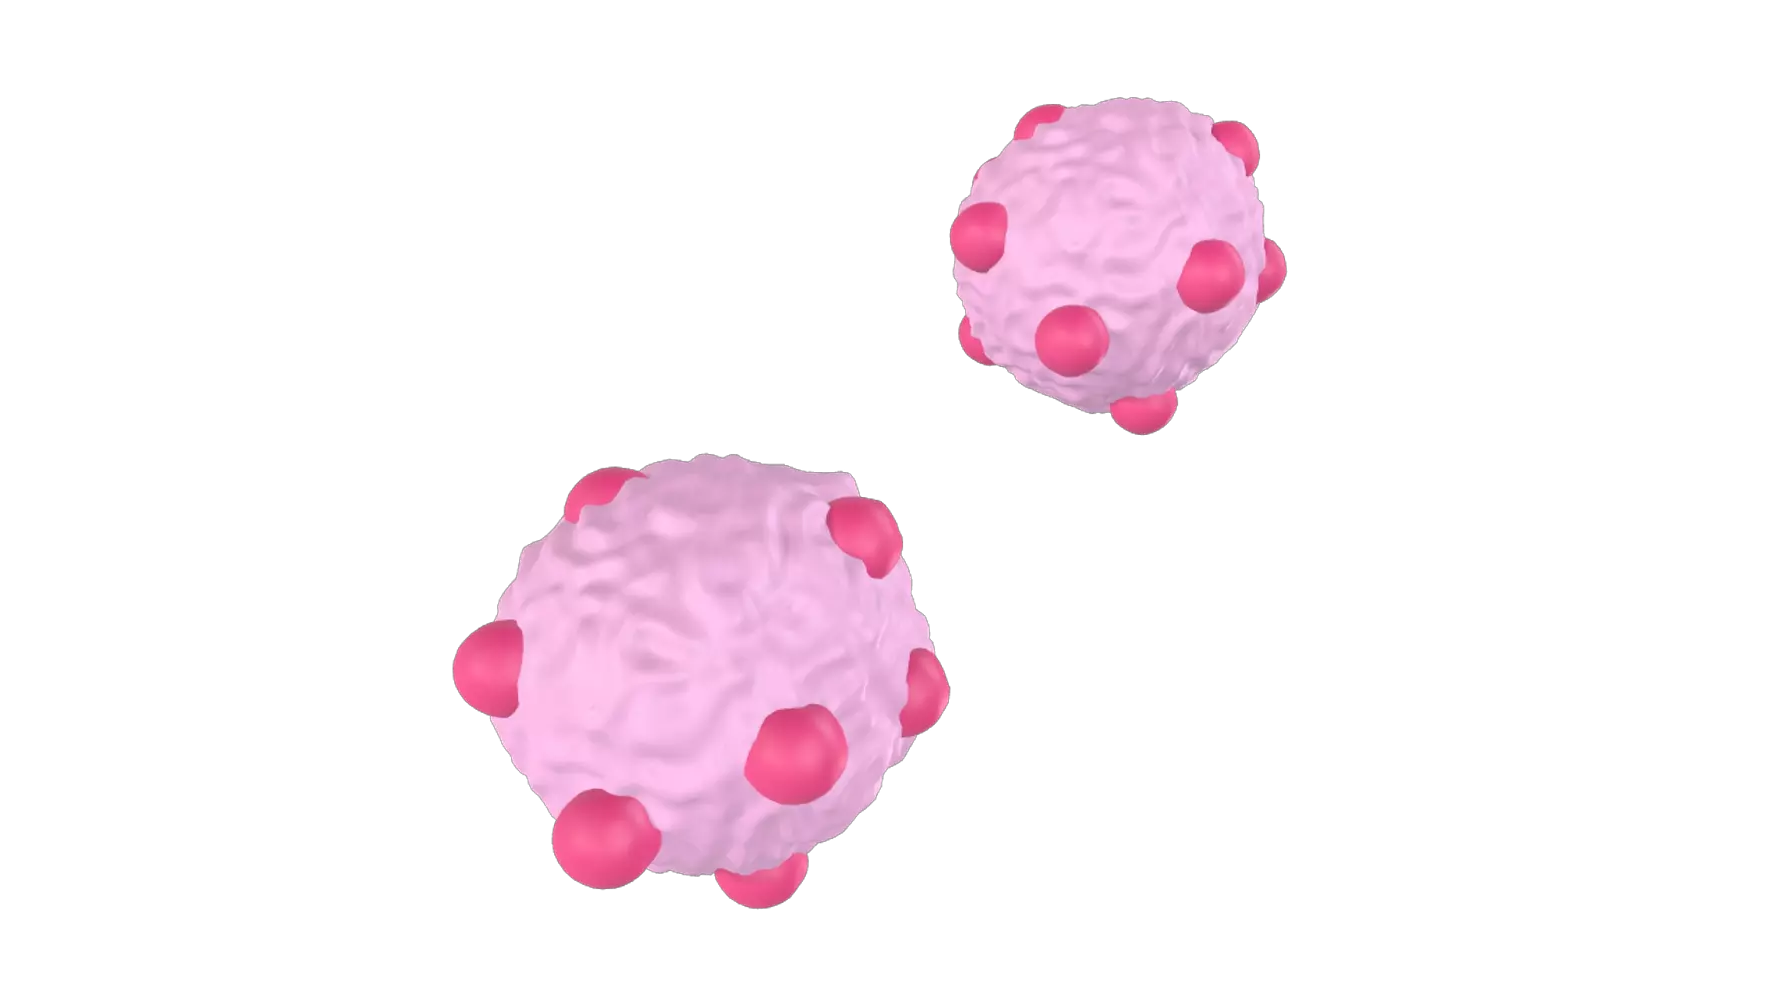 Cancer Cells 3D Graphic